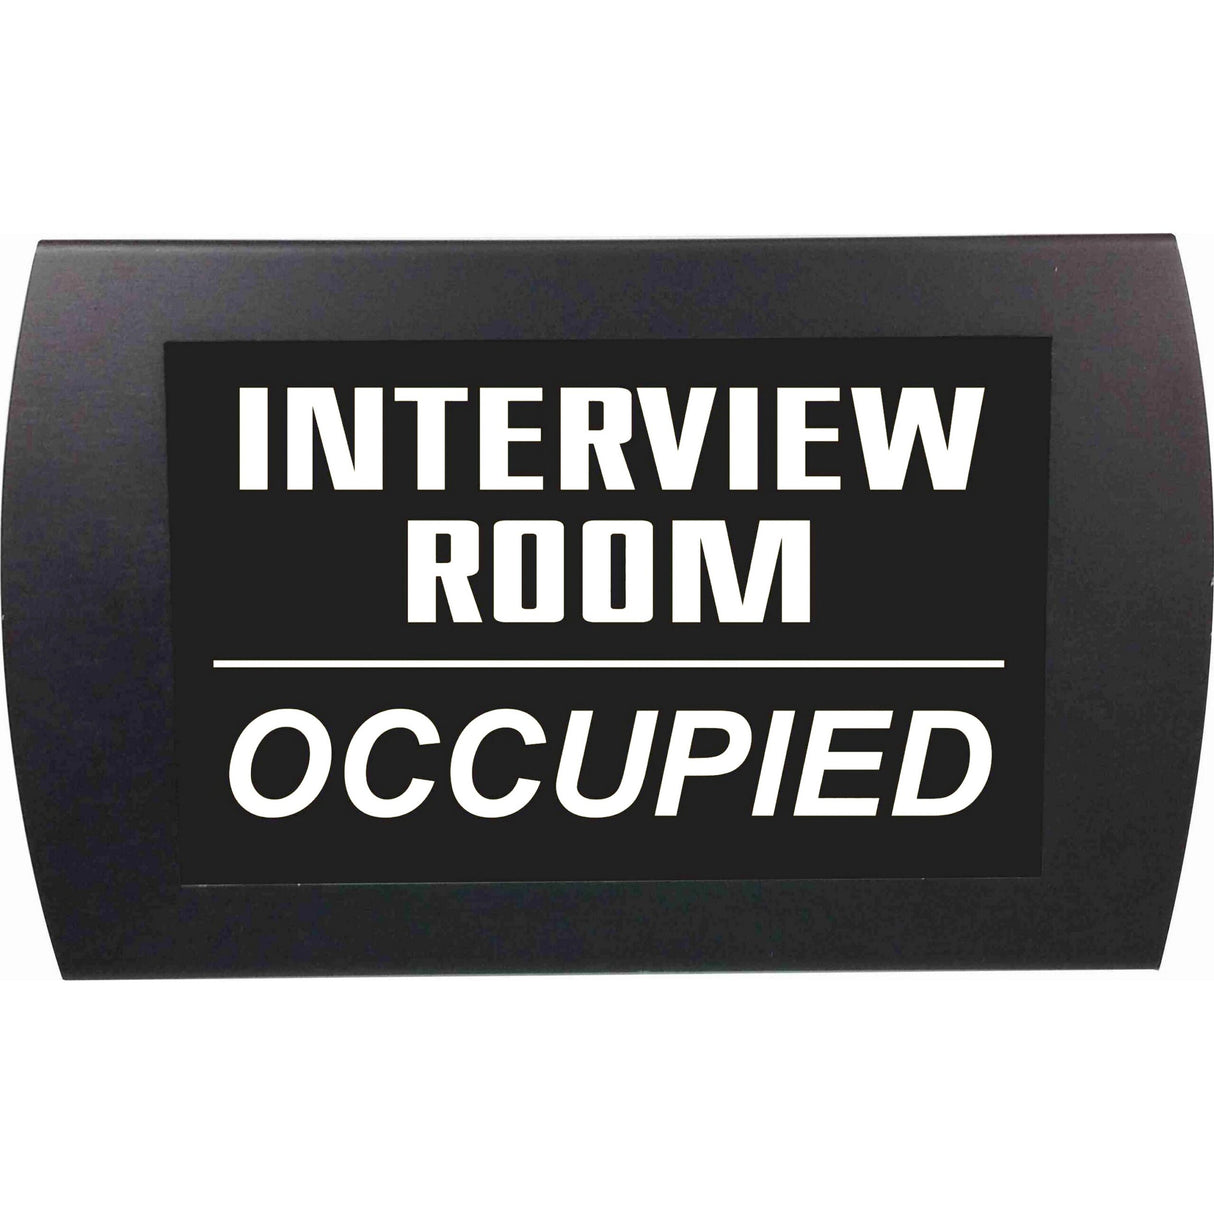 American Recorder Technologies OAS-2055M "INTERVIEW ROOM OCCUPIED" LED Lighted Sign, White